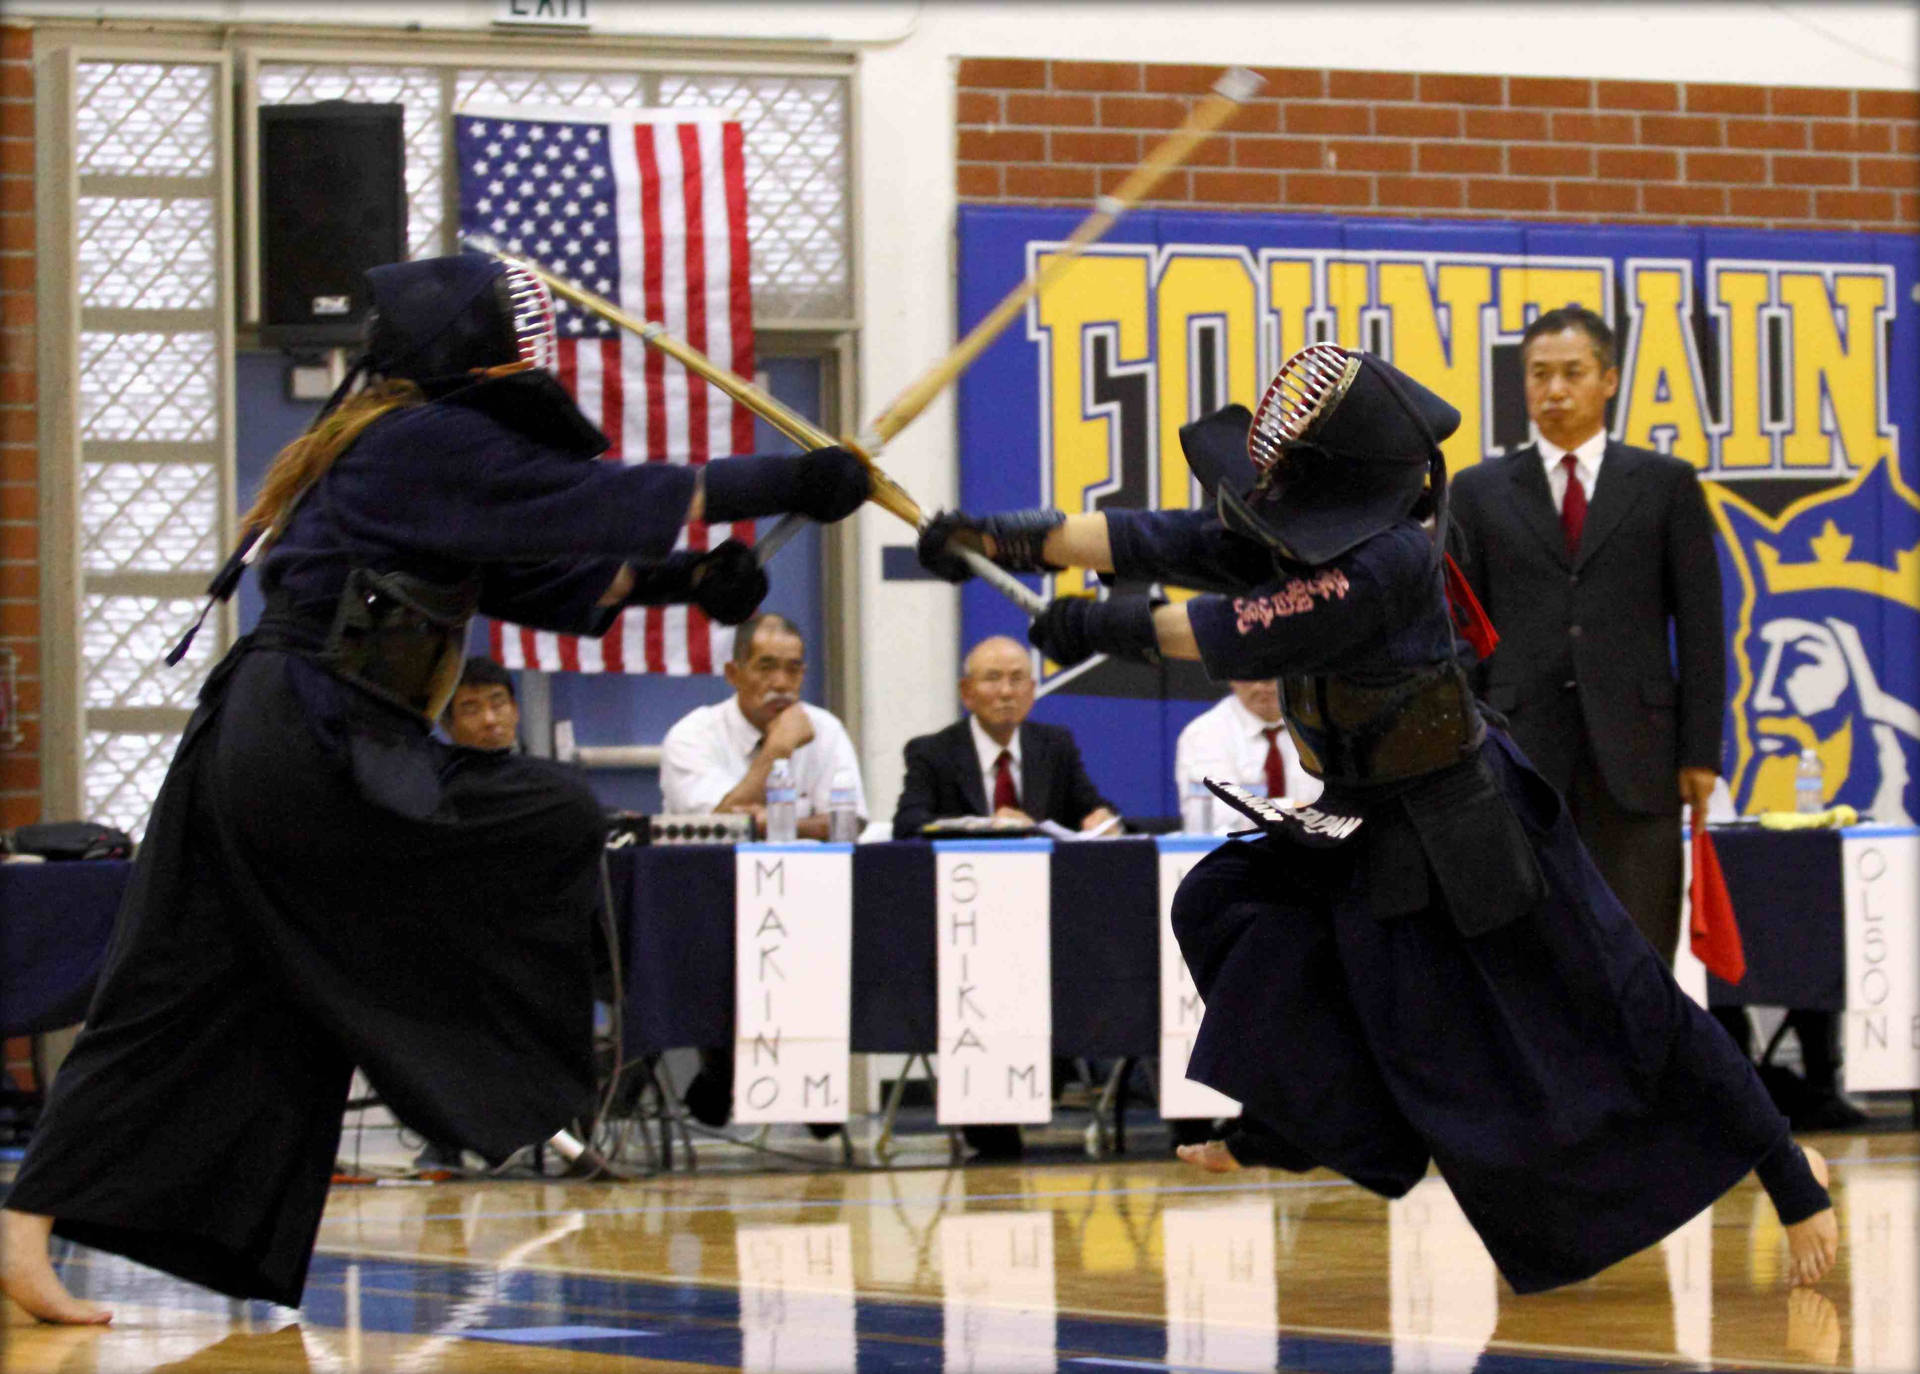 Intense Duel at the United States Kendo Federation Championship Wallpaper